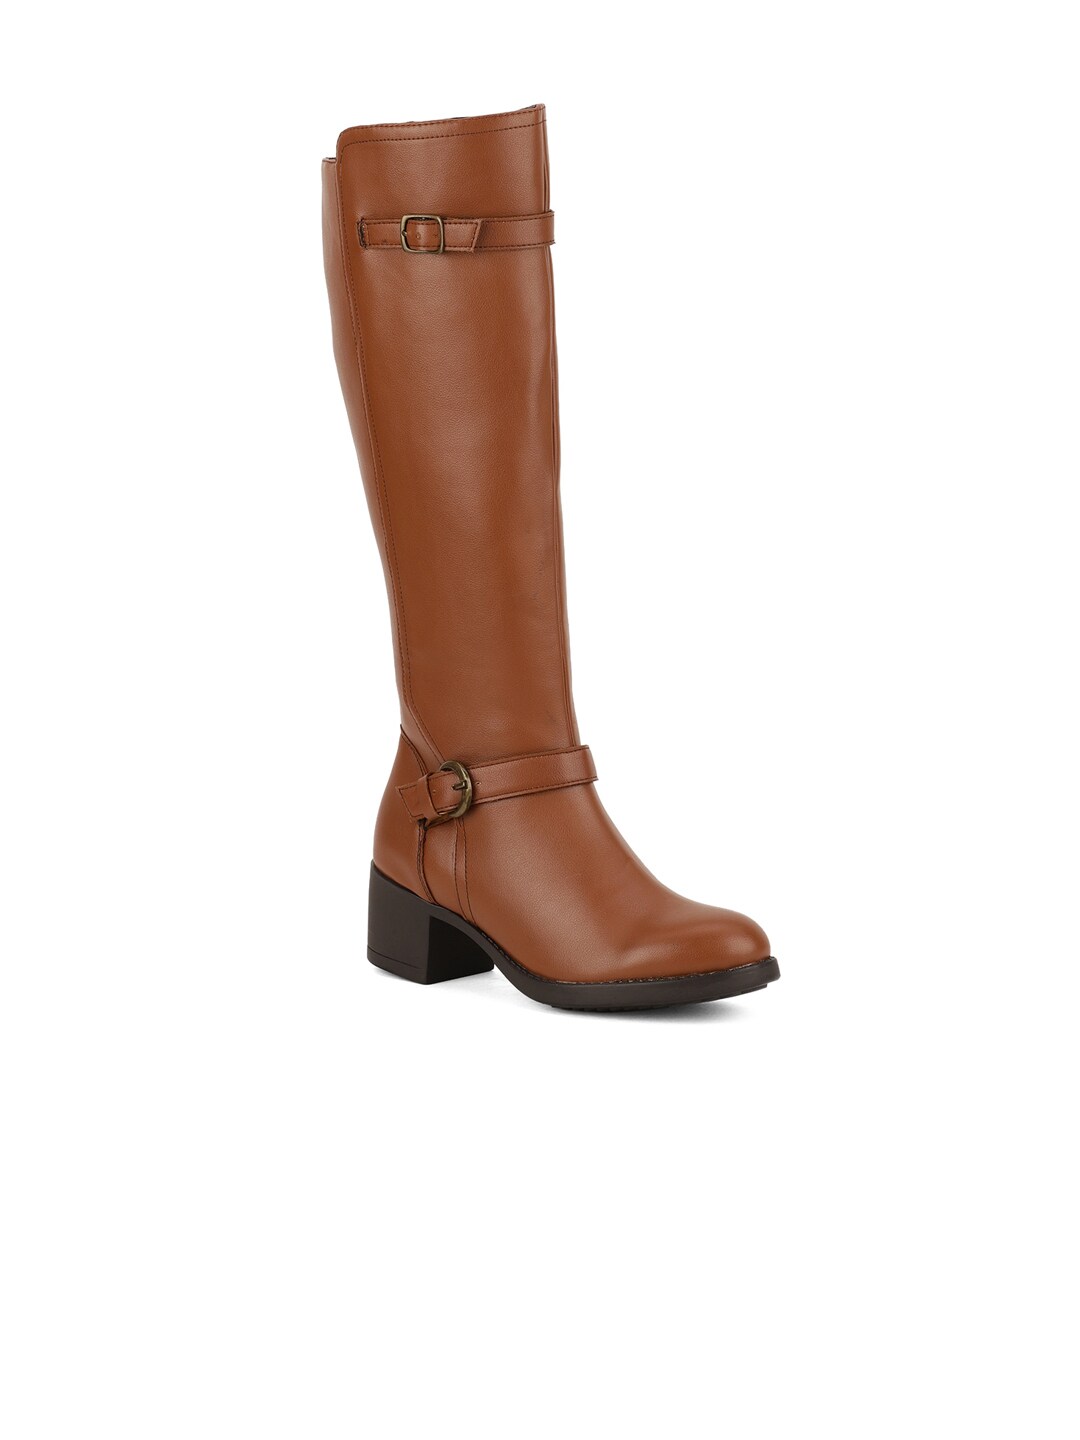 Bruno Manetti Tan Leather Block Heeled Boots with Buckles Price in India